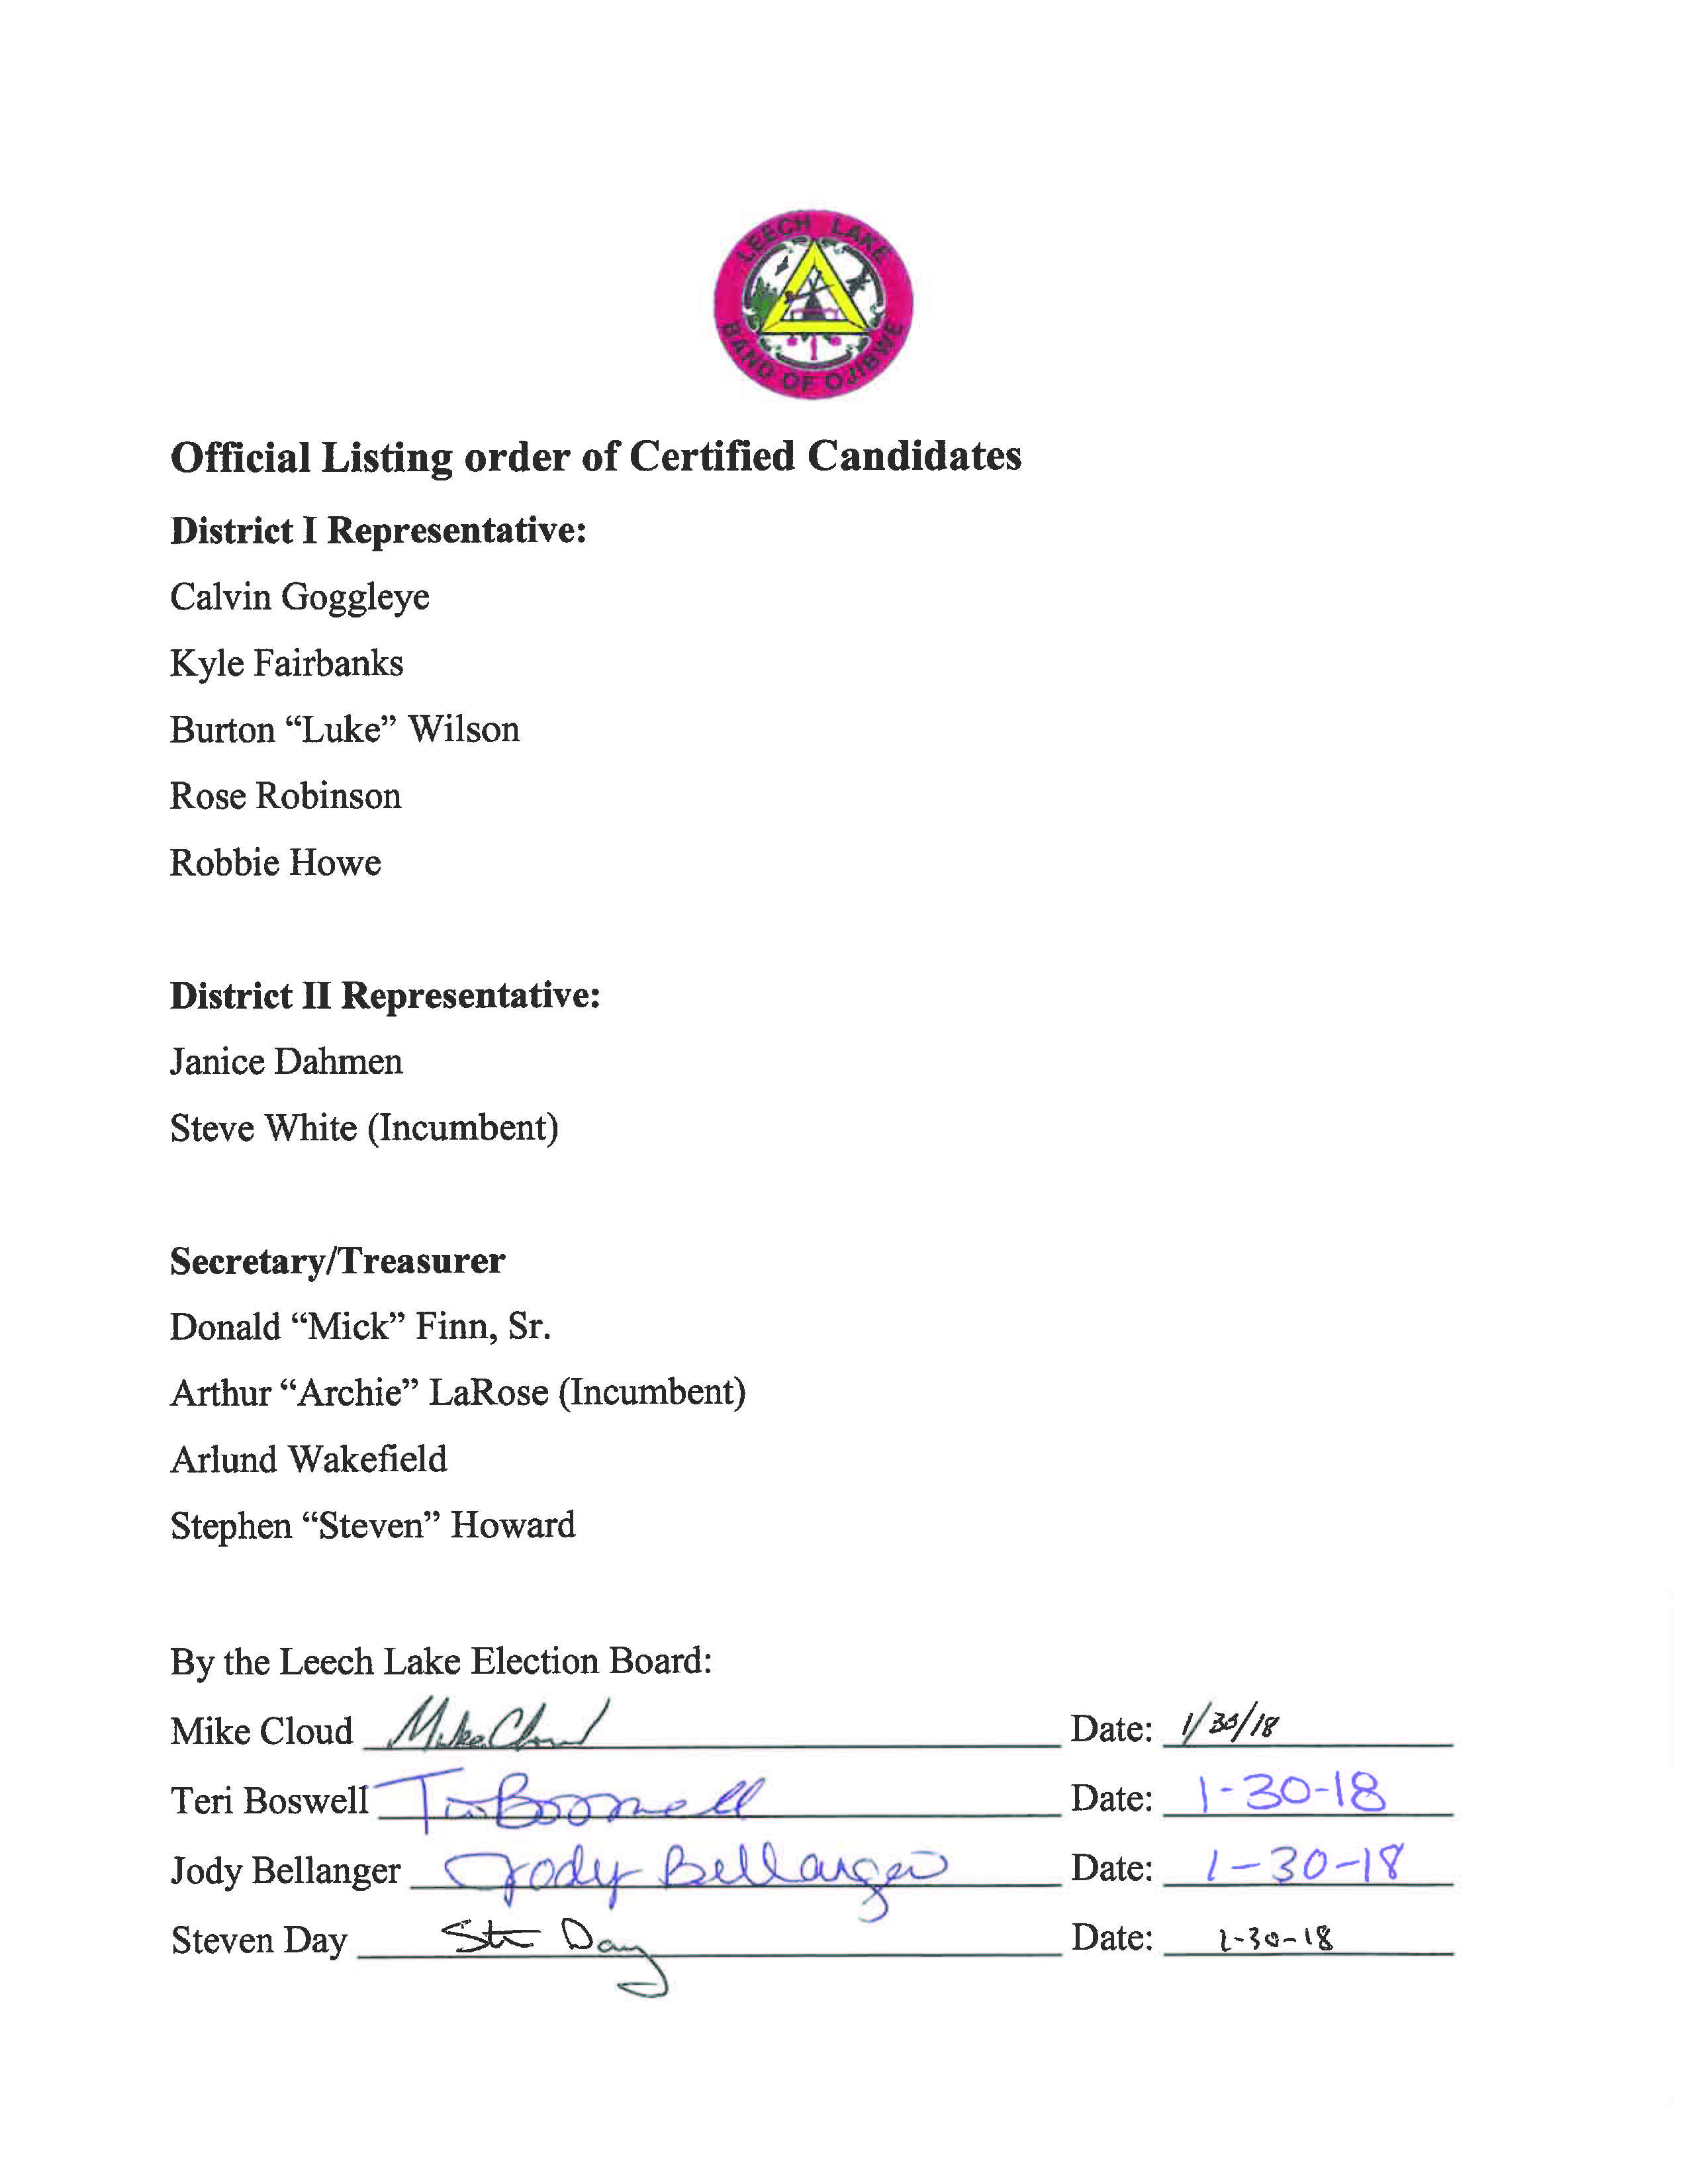 Official Listing of Certified Candidates LLBO